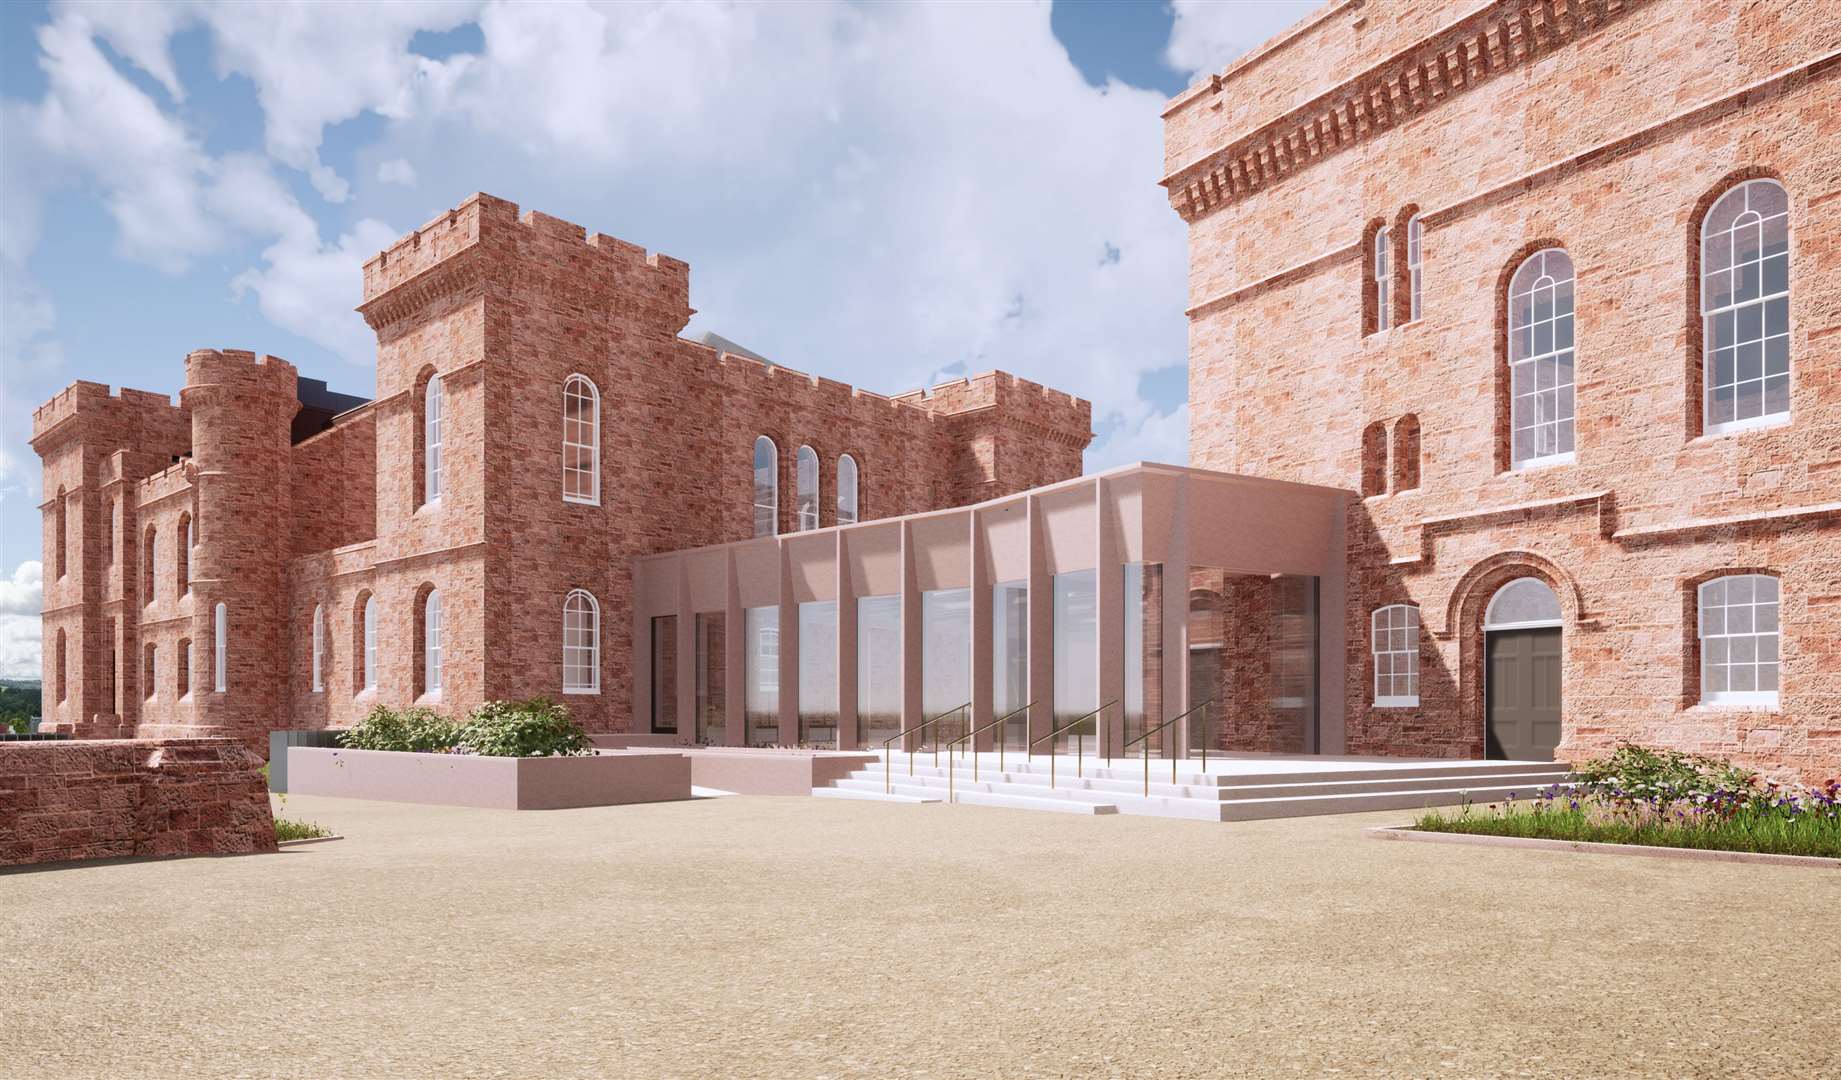 The planned new exterior of Inverness Castle, showing a proposed new building linking the two towers, viewed from the east.